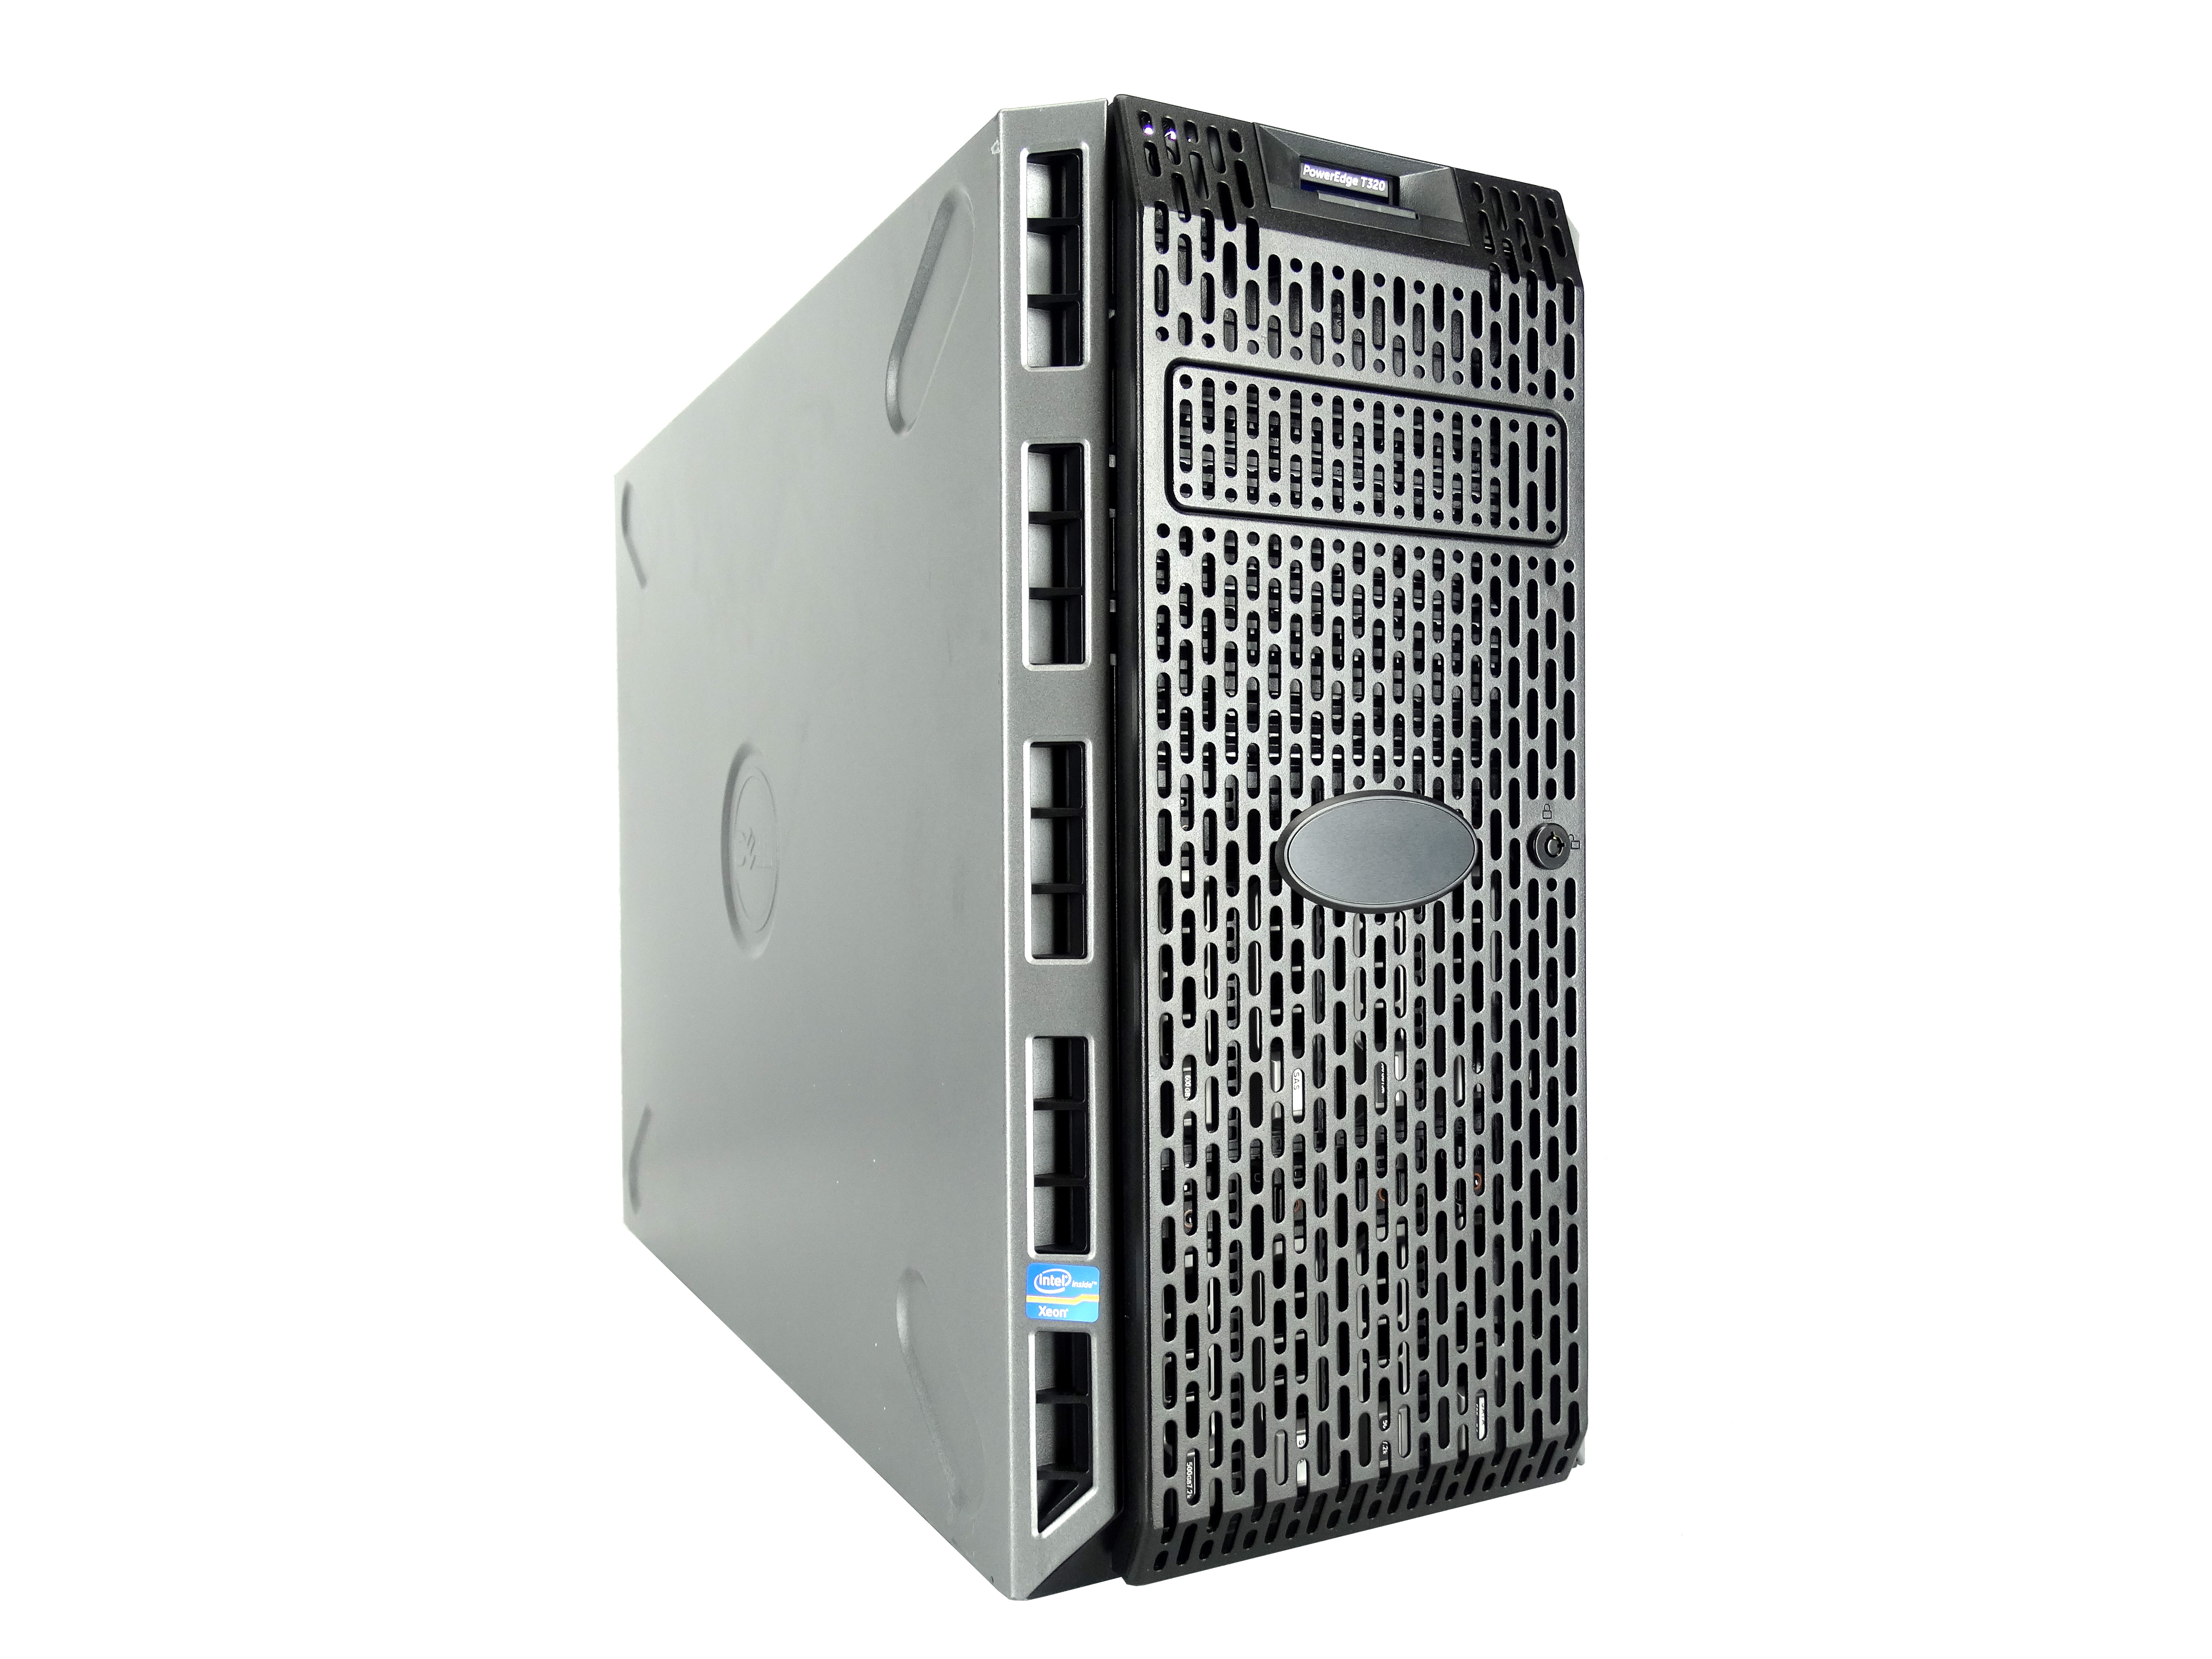 Dell PowerEdge T320, 1x Xeon E5-2470 2.3GHz Eight Core Processor, 64GB DDR3 Memory, 8x 2TB 7.2K 3.5" SATA Hard Drives, PERC H700 Controller, 2x Power Supplies (Used) - image 1 of 3